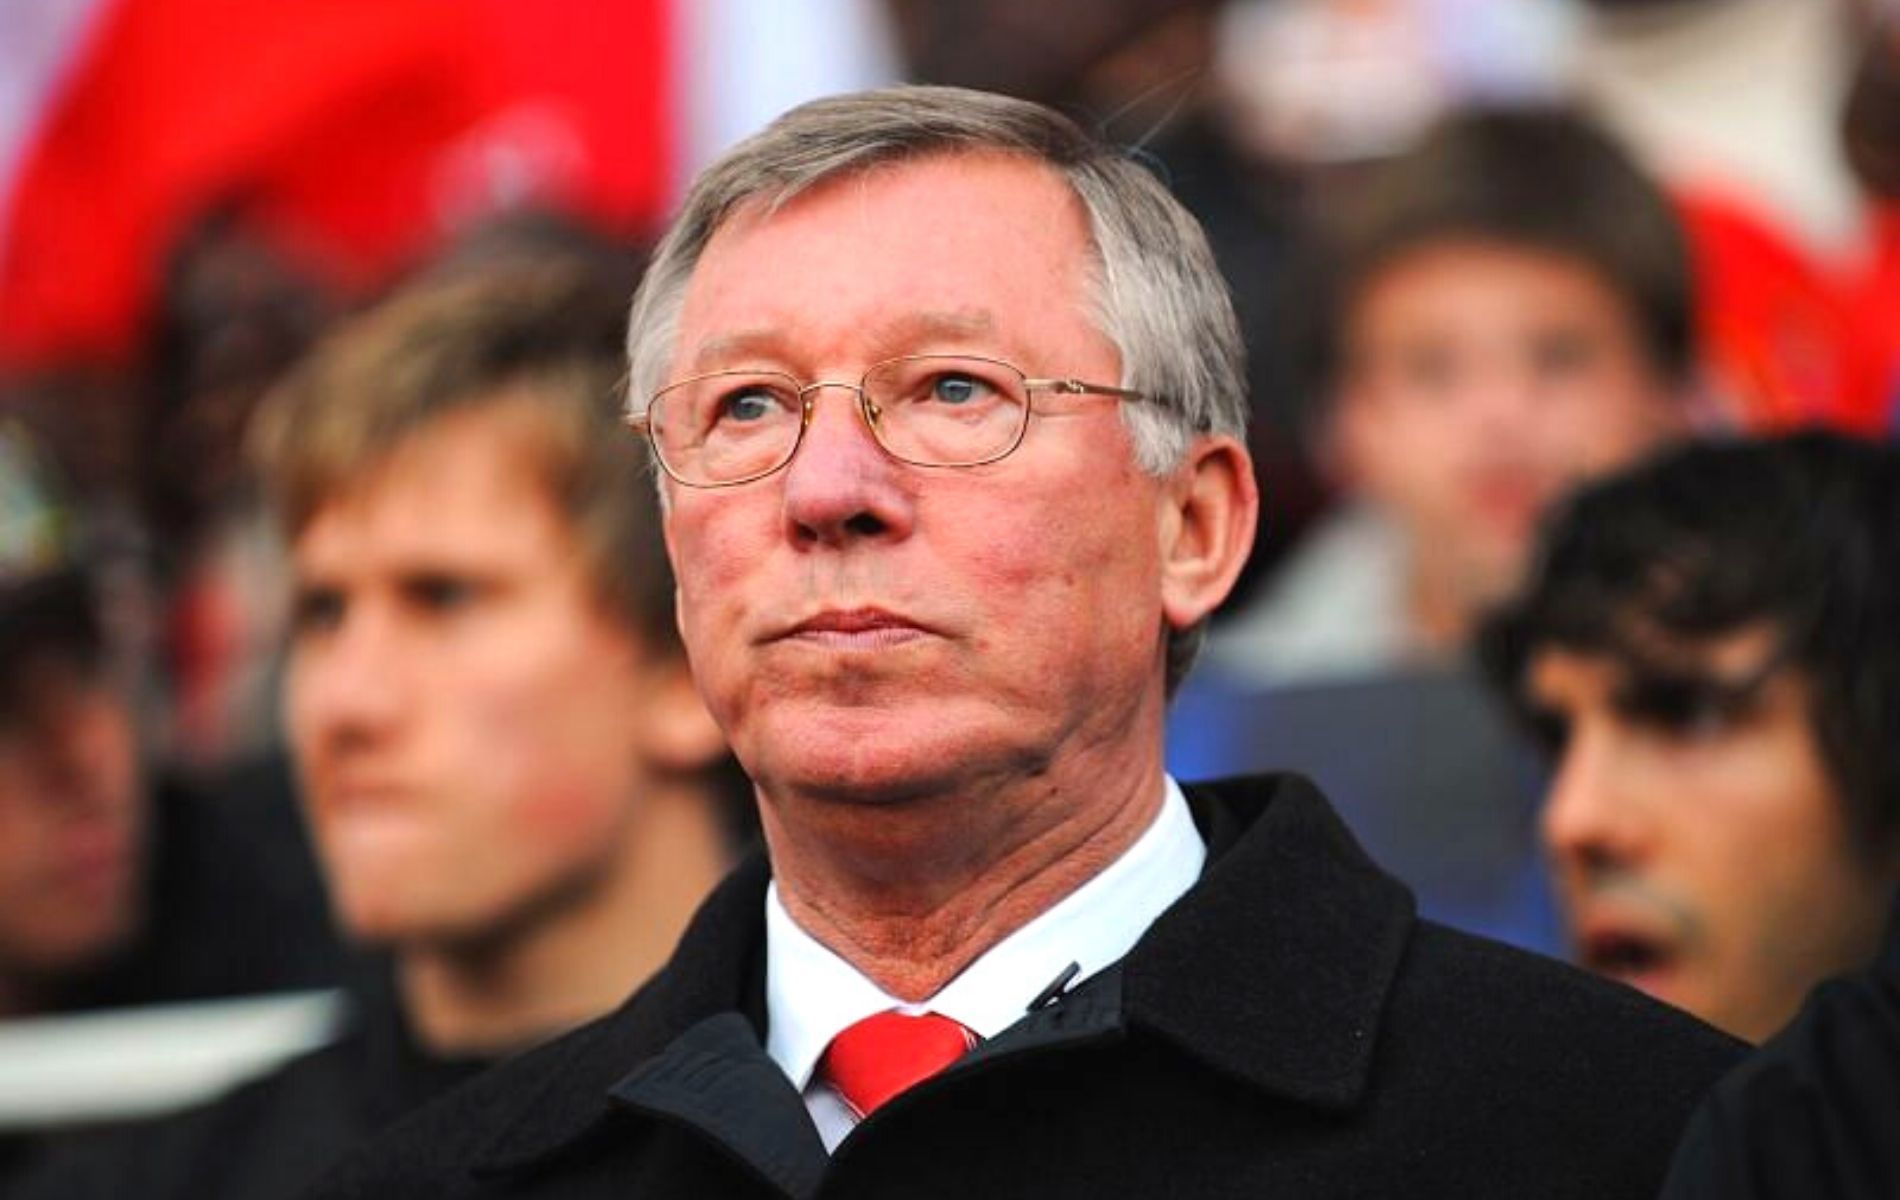 Sir Alex Ferguson will be disappointed with some of these decisions